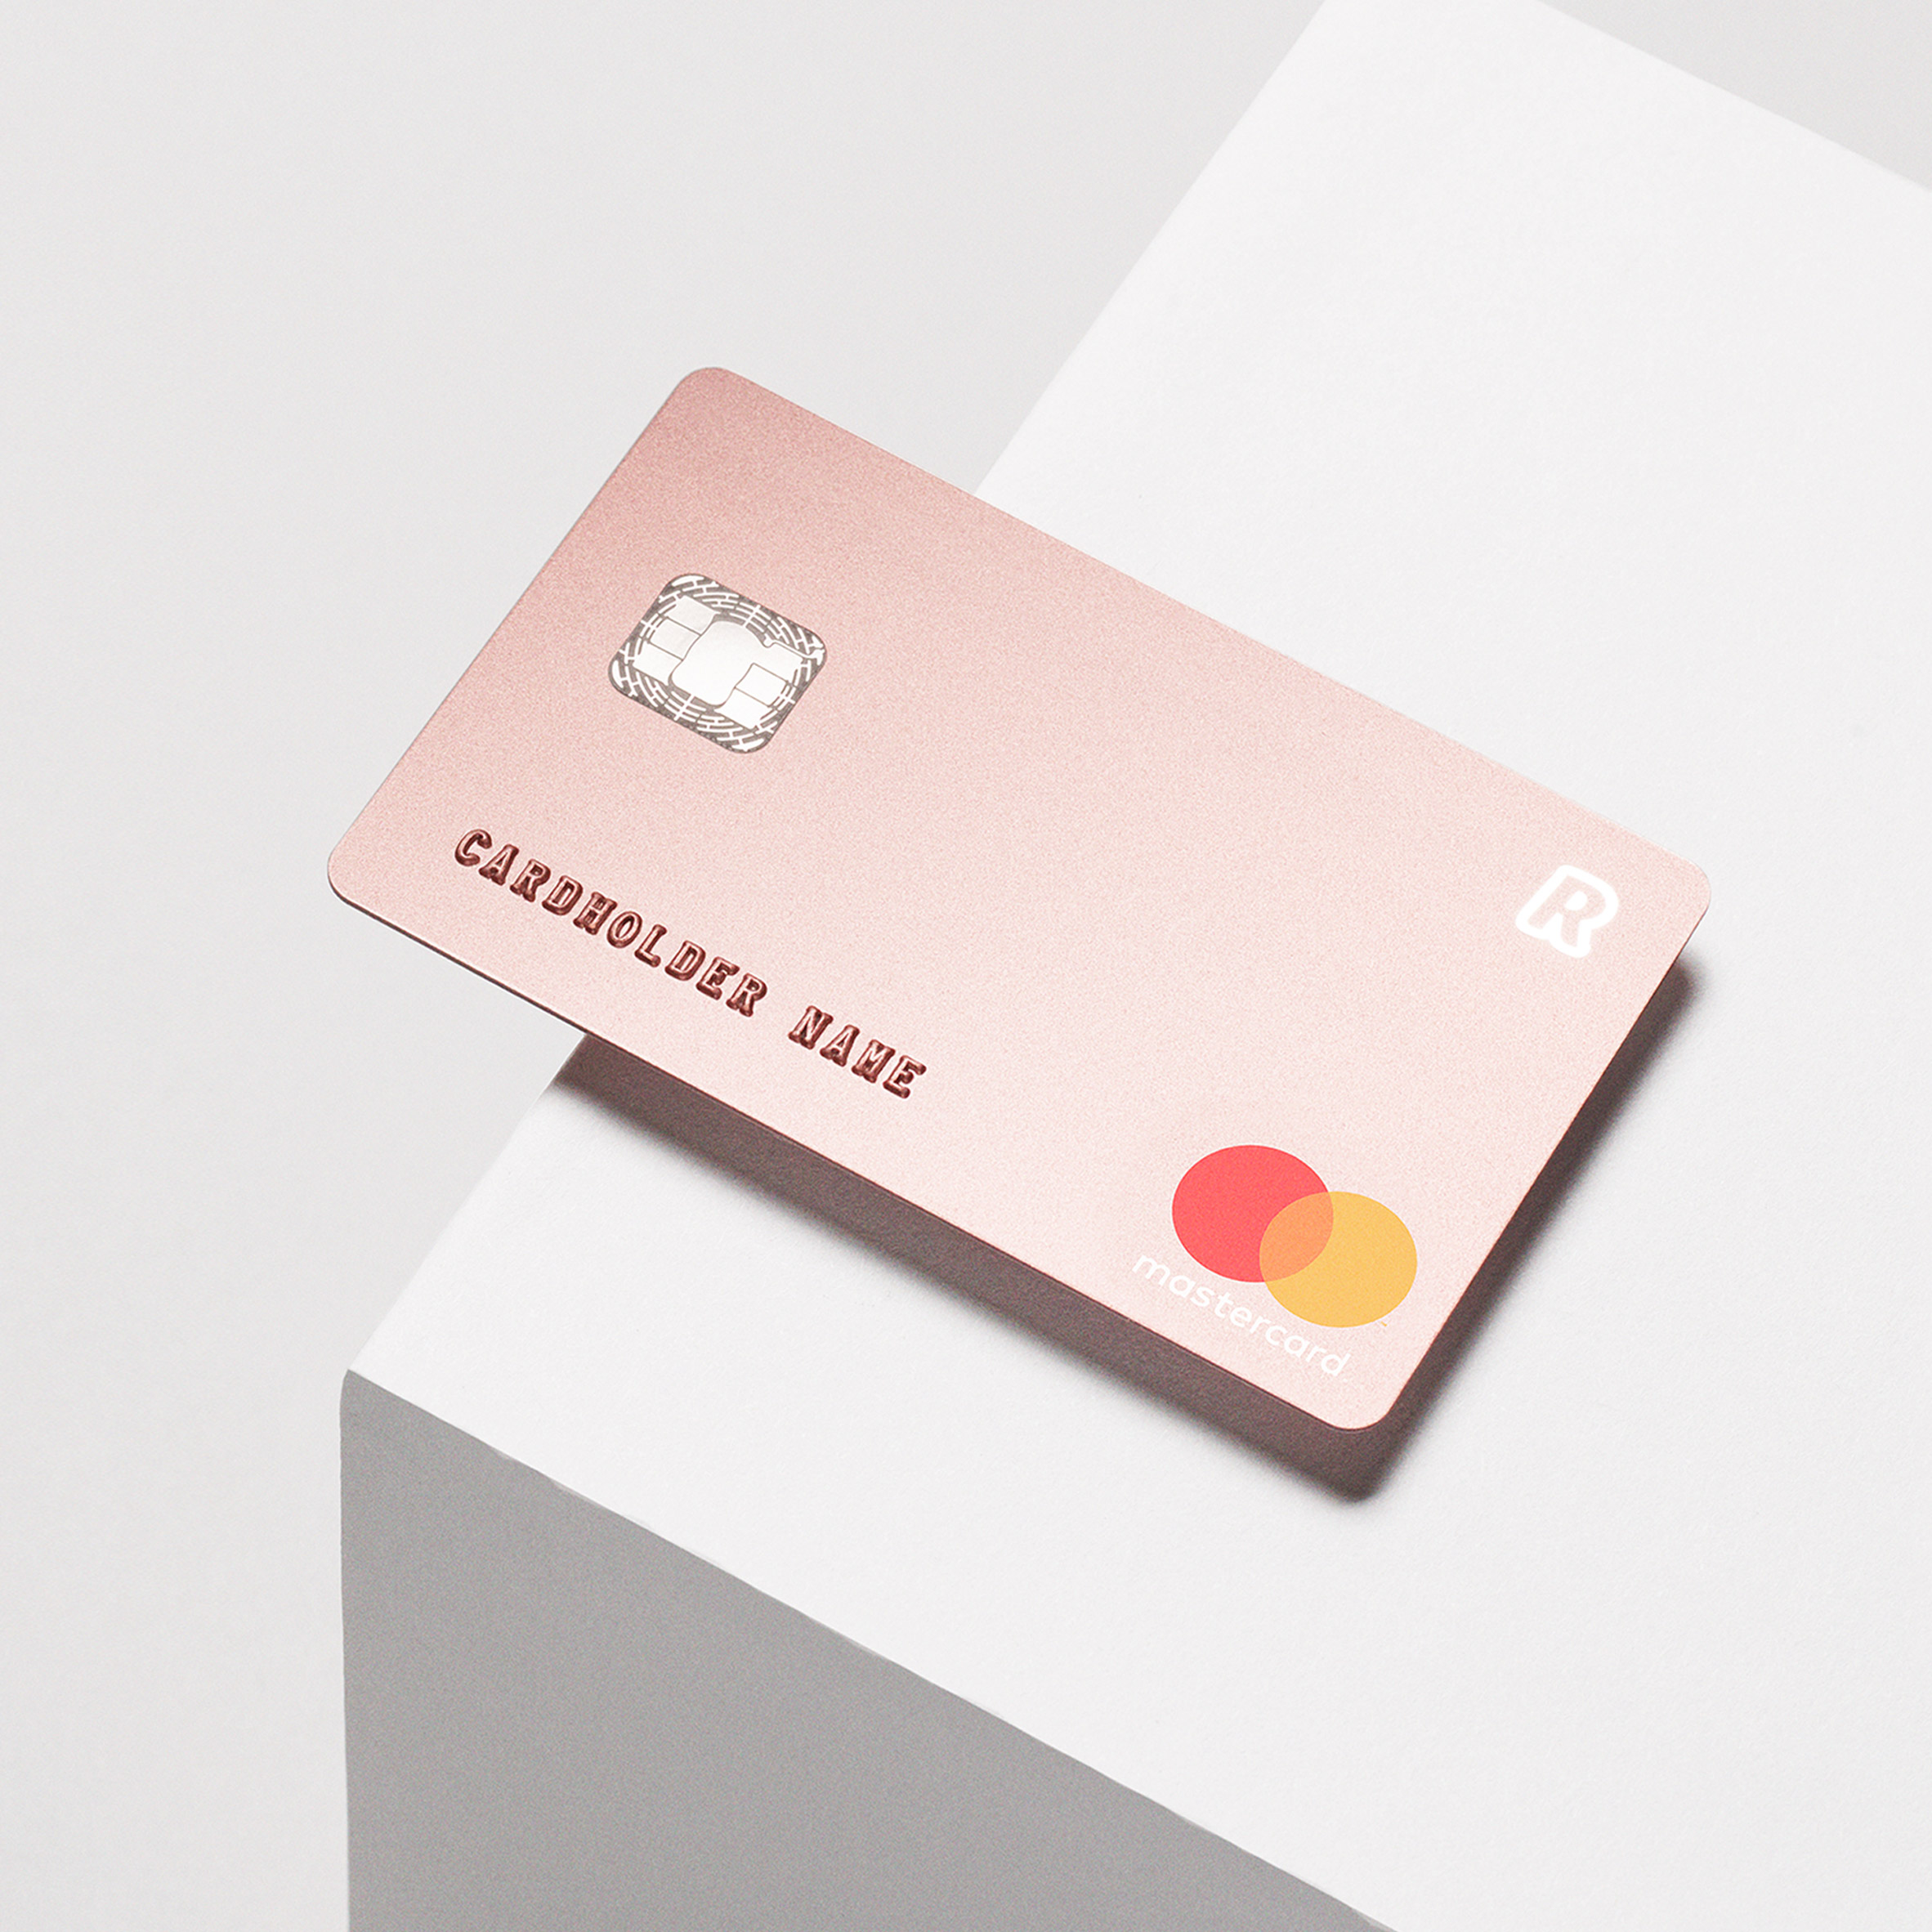 Blond Creates Stripped Back Bank Card For Financial Services Start Up Revolut